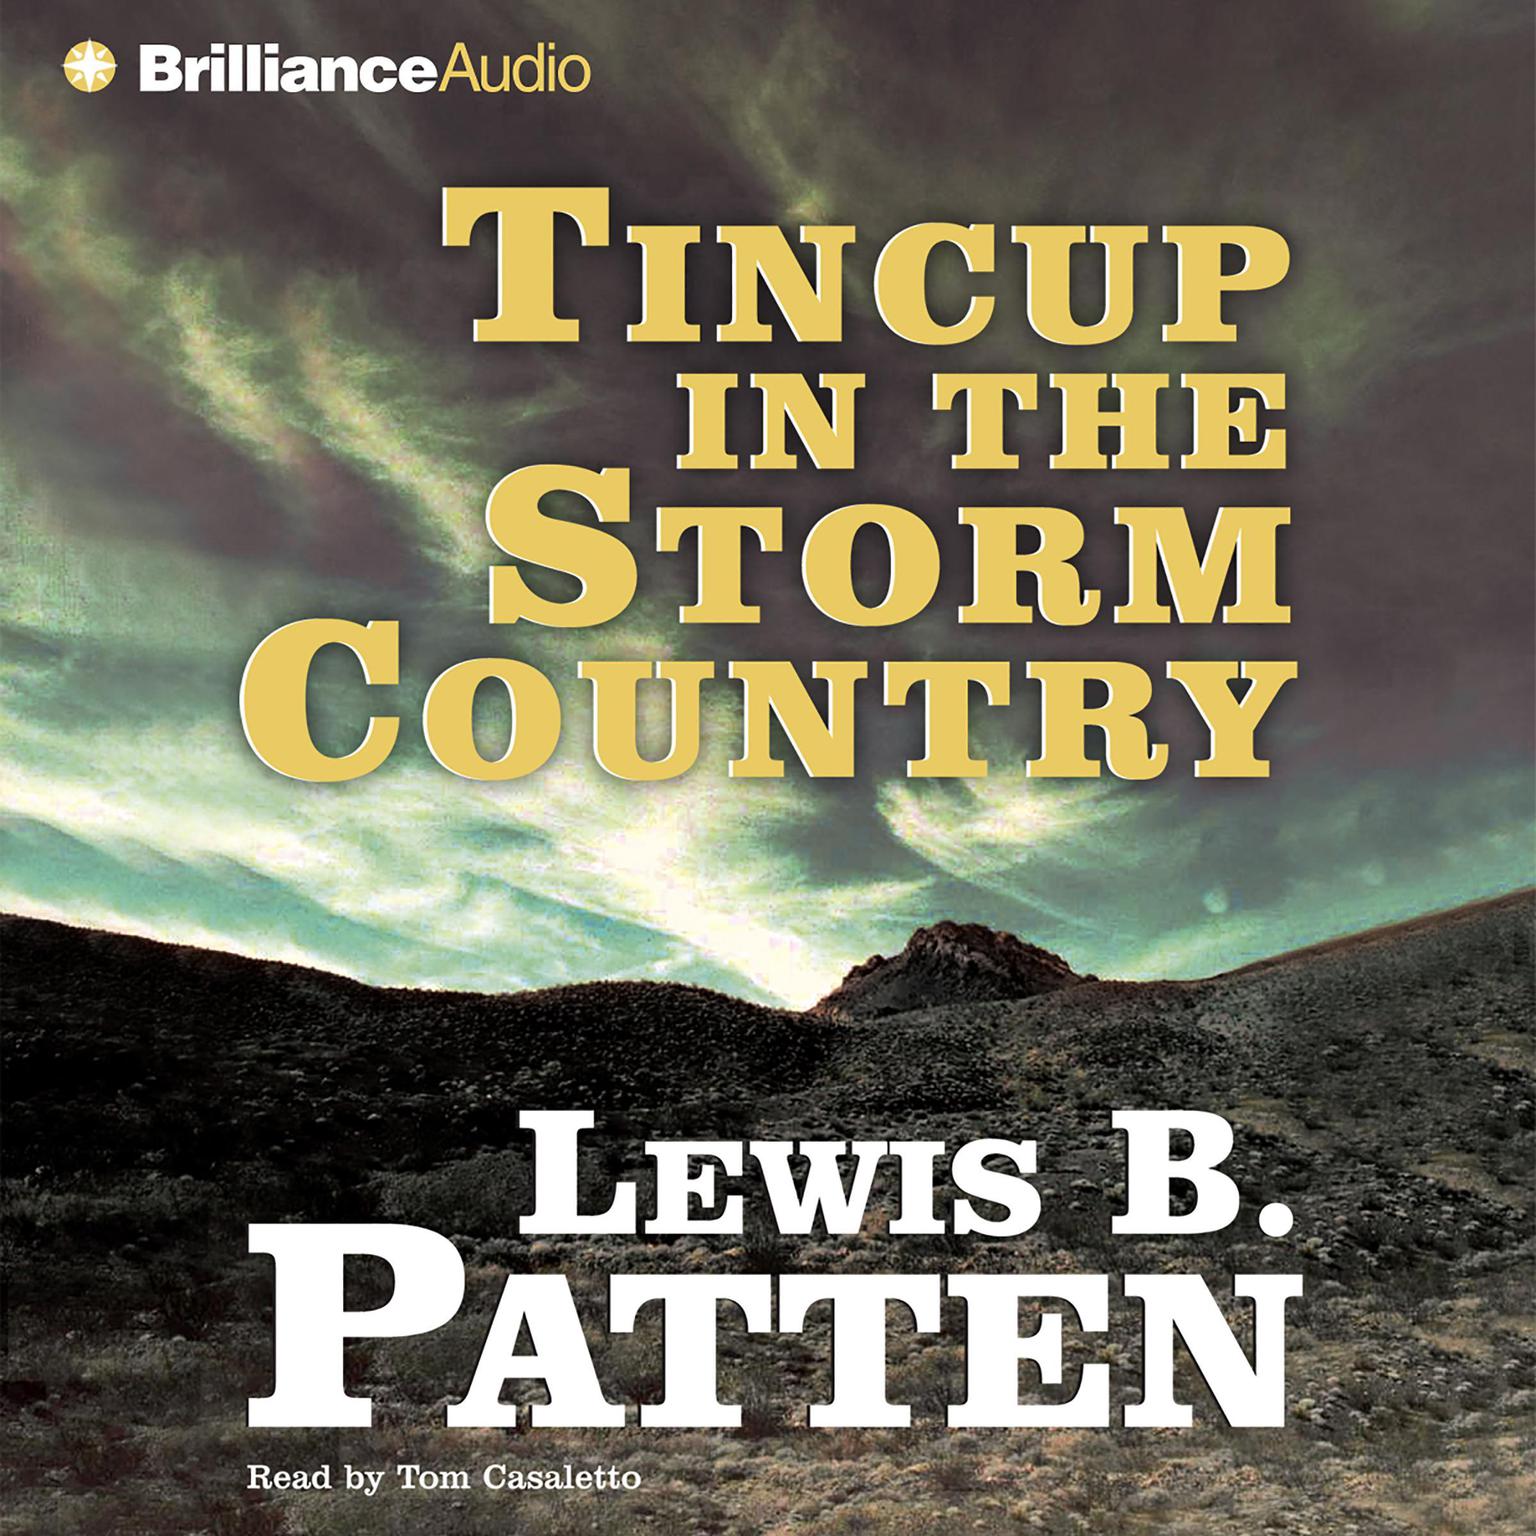 Tincup in the Storm Country (Abridged) Audiobook, by Lewis B. Patten